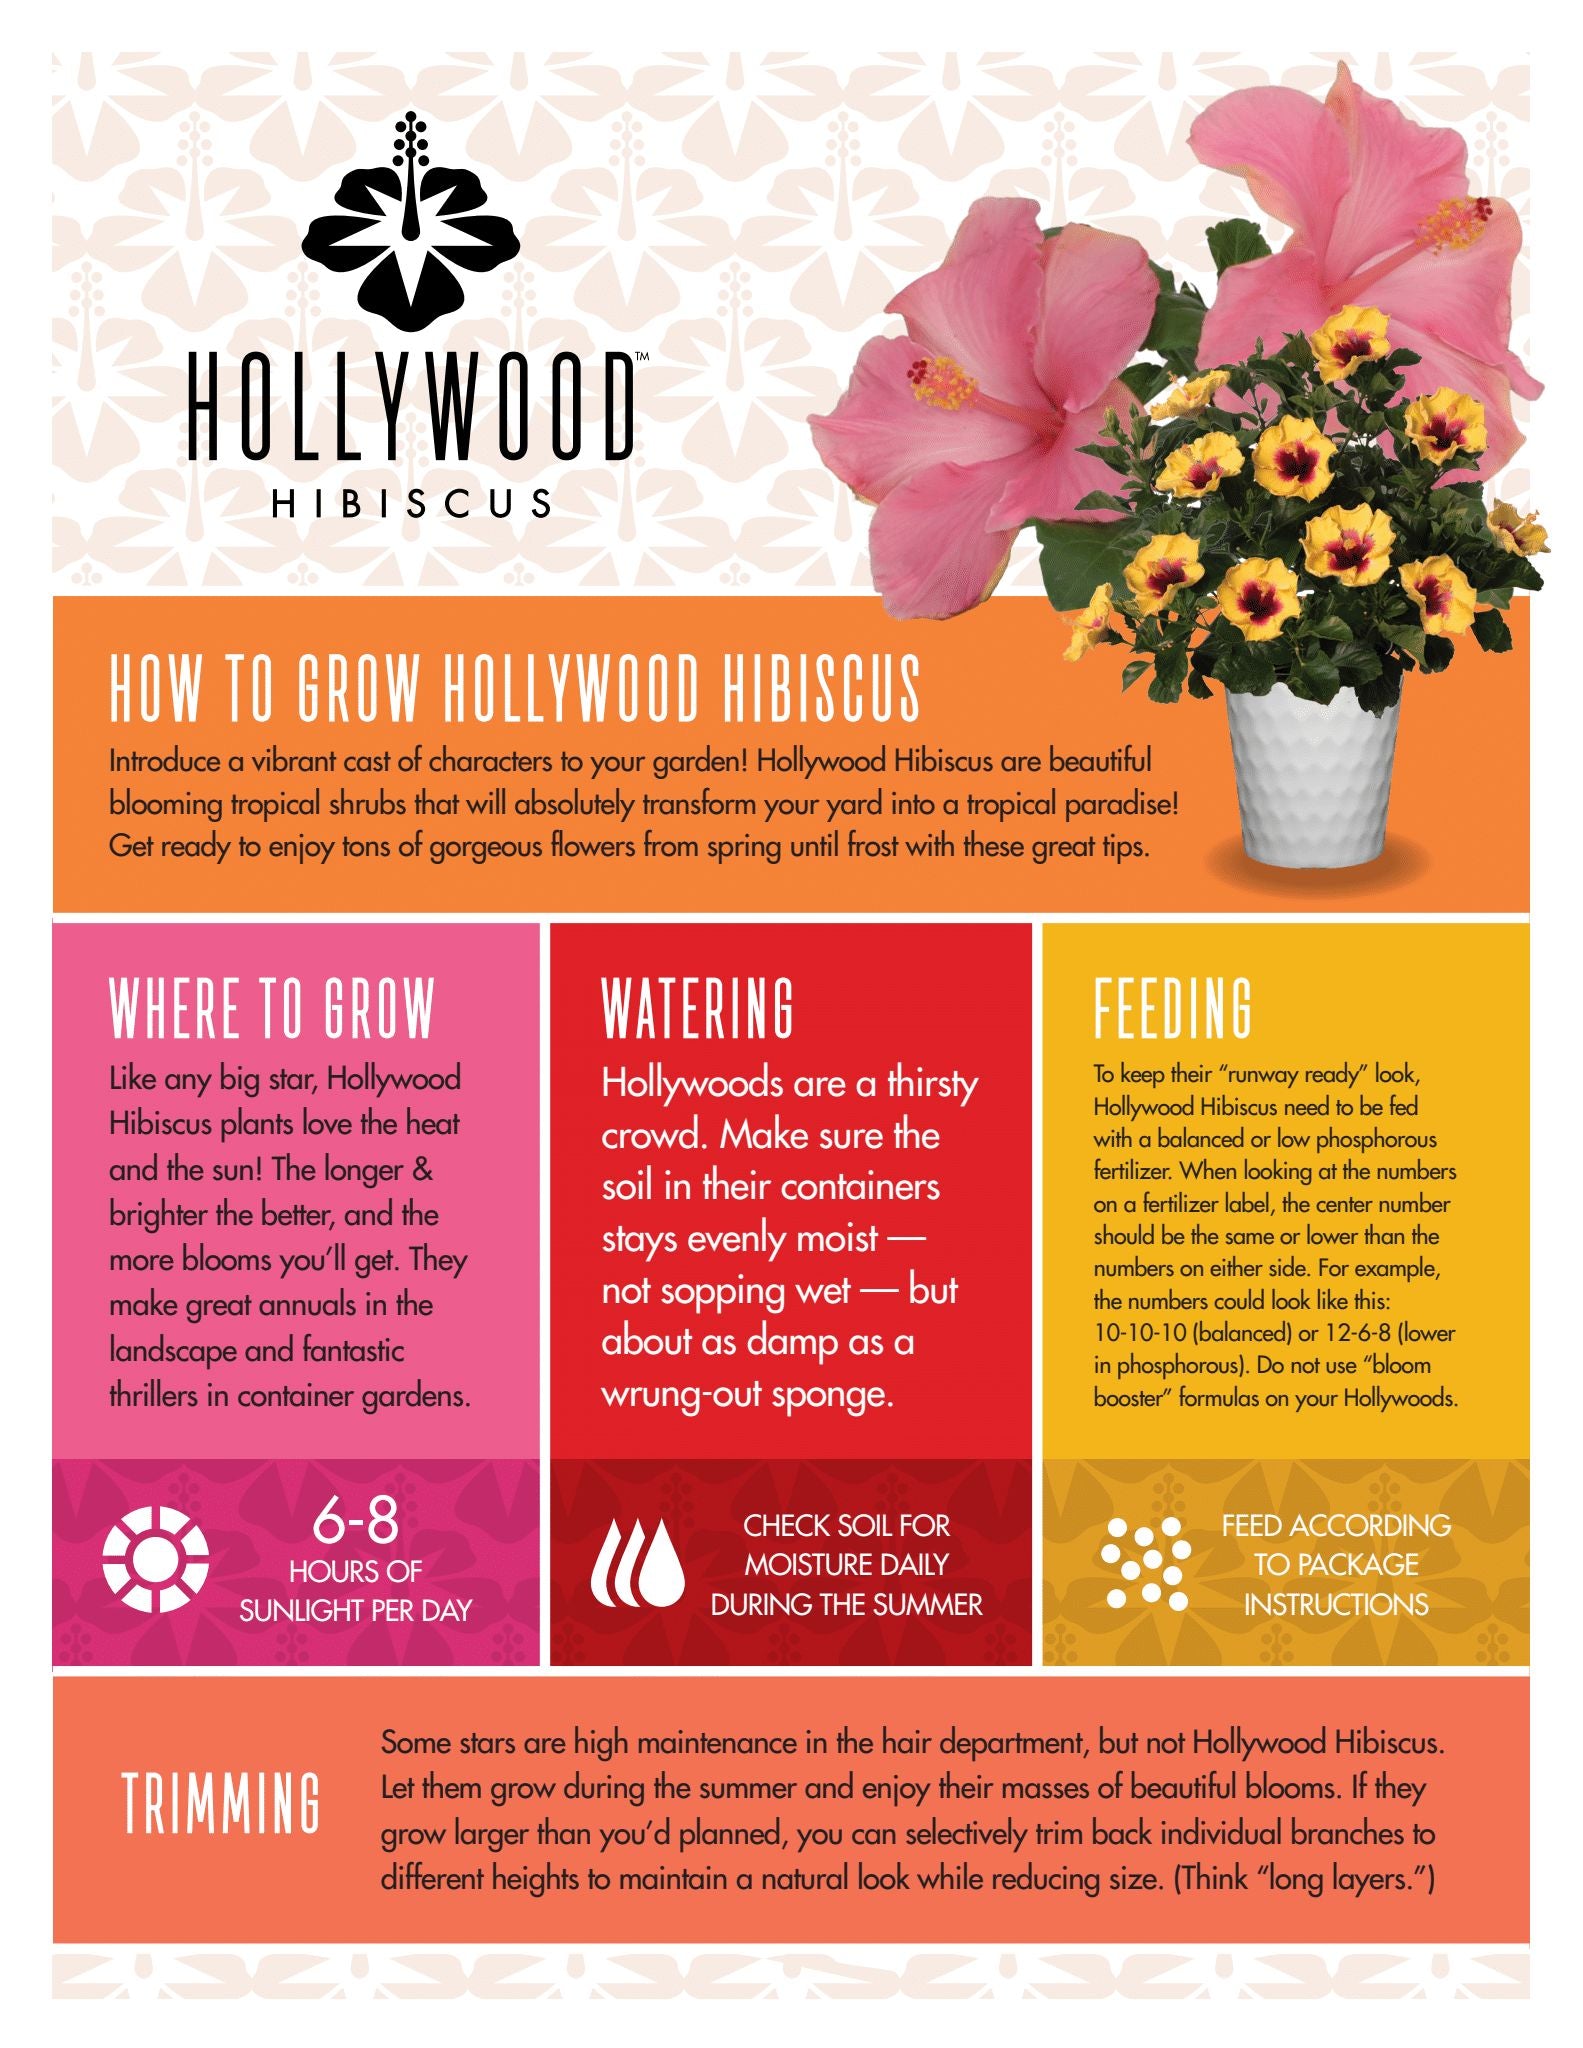 America's Sweetheart™ - Hollywood® Hibiscus - 1 Gallon